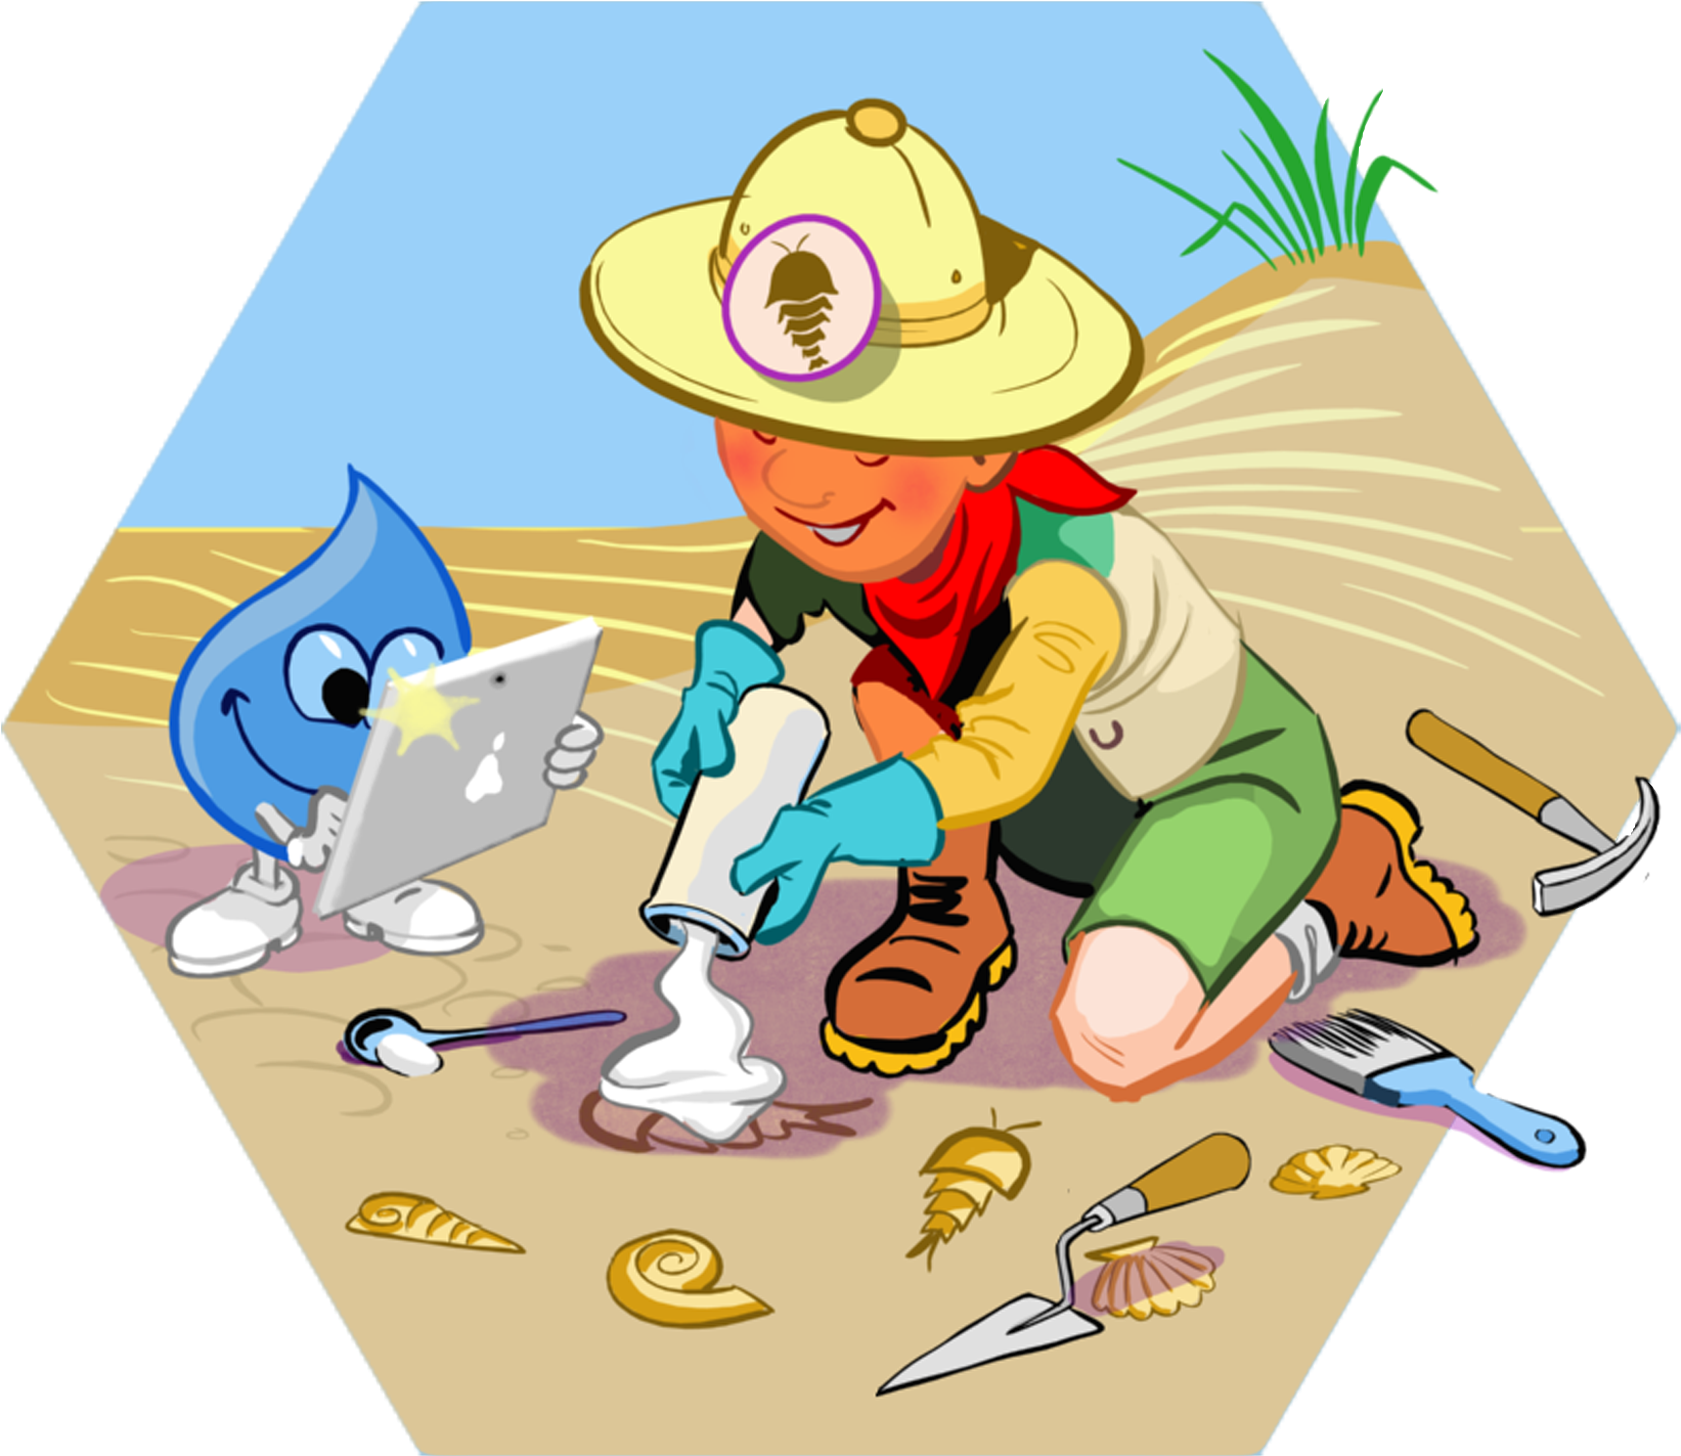 fossil clipart kid